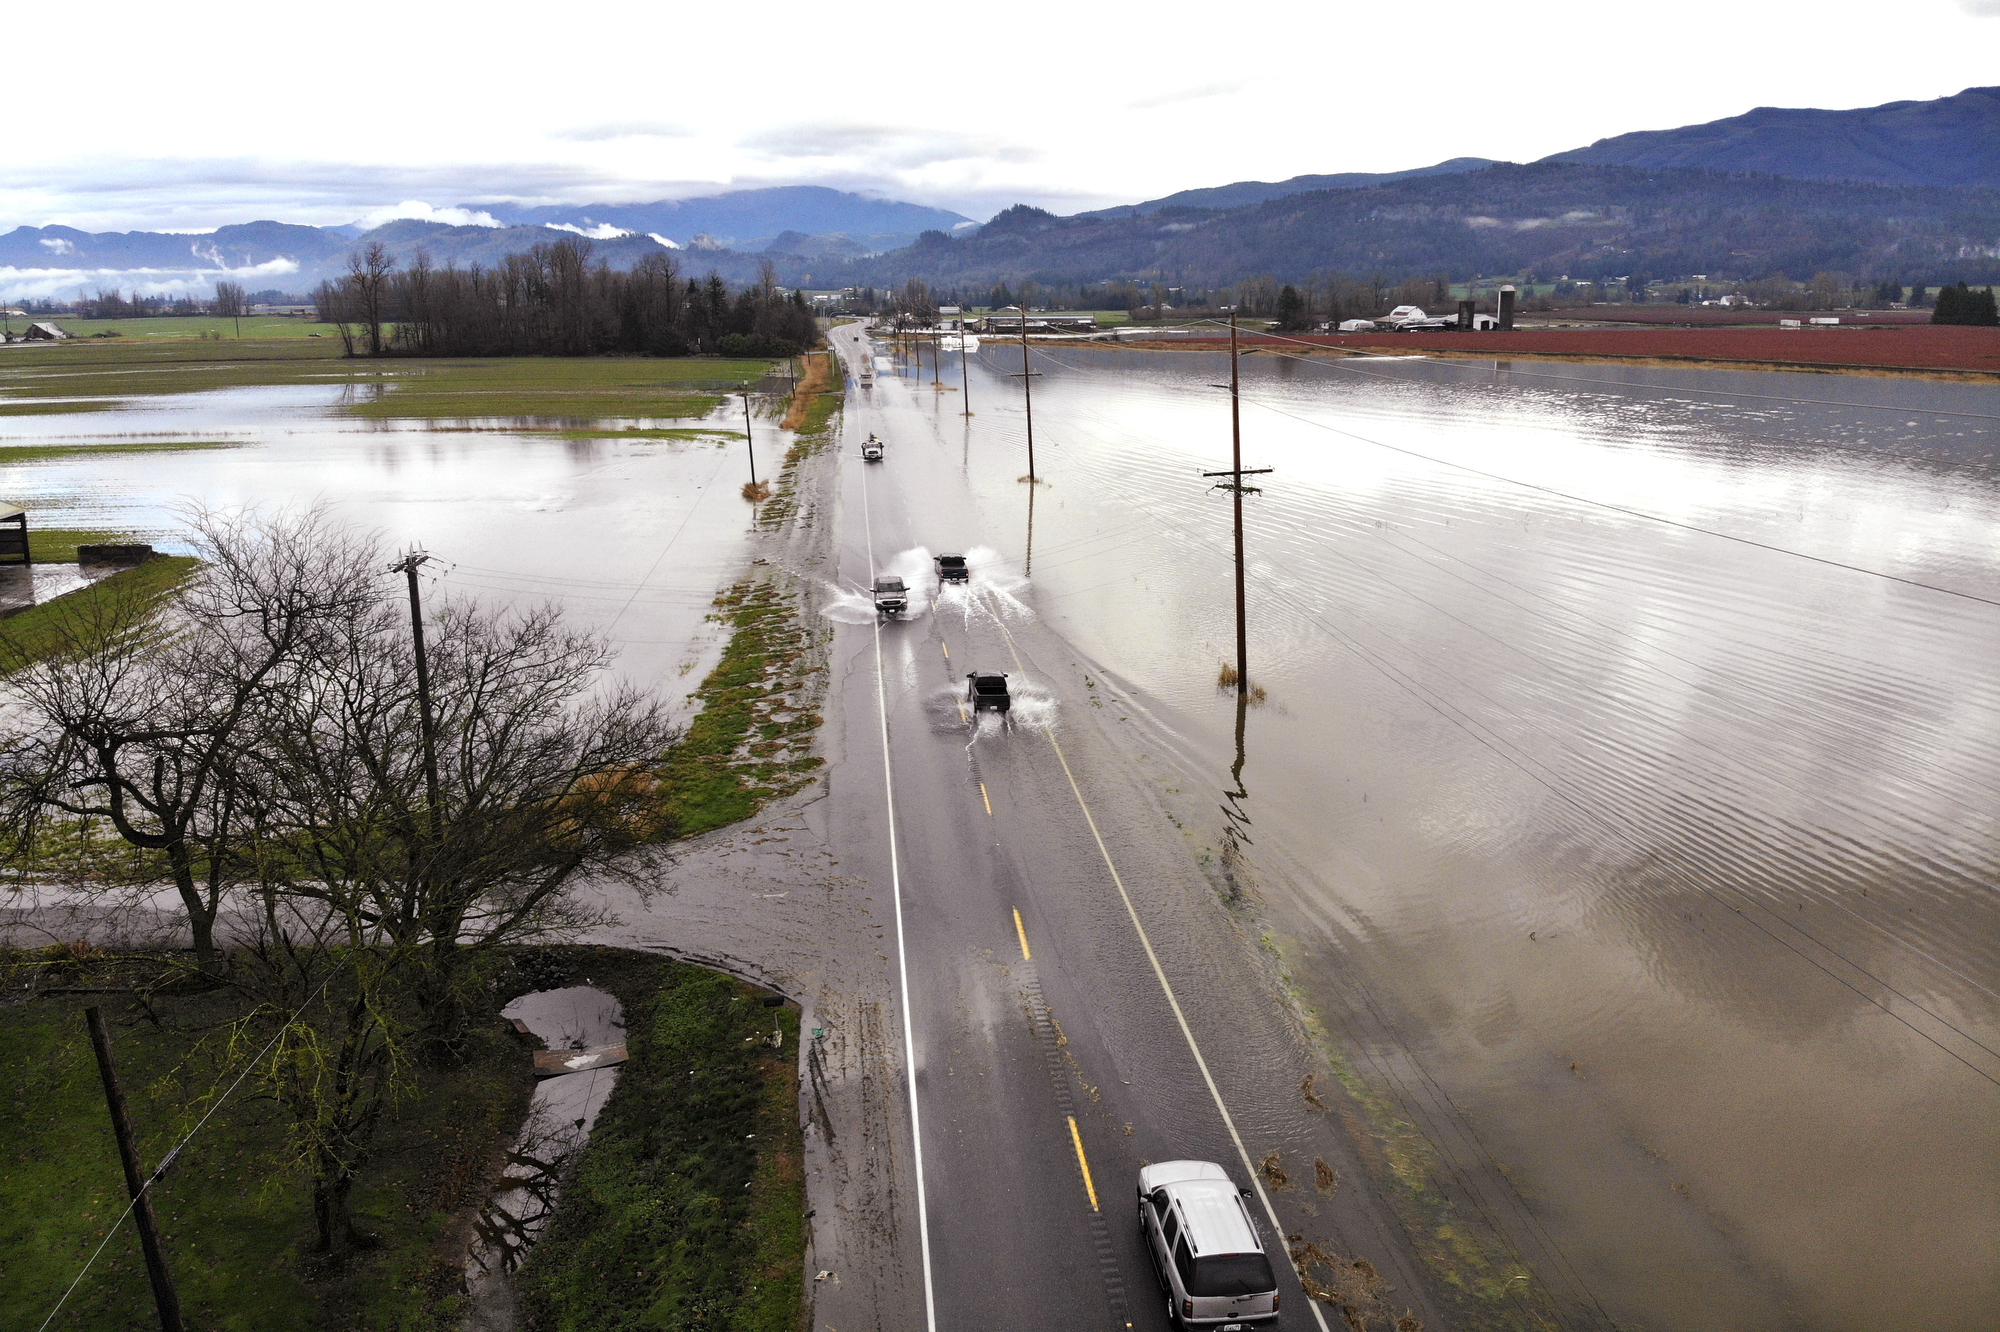 Cars driving over a partially flooded road going through flooded fields